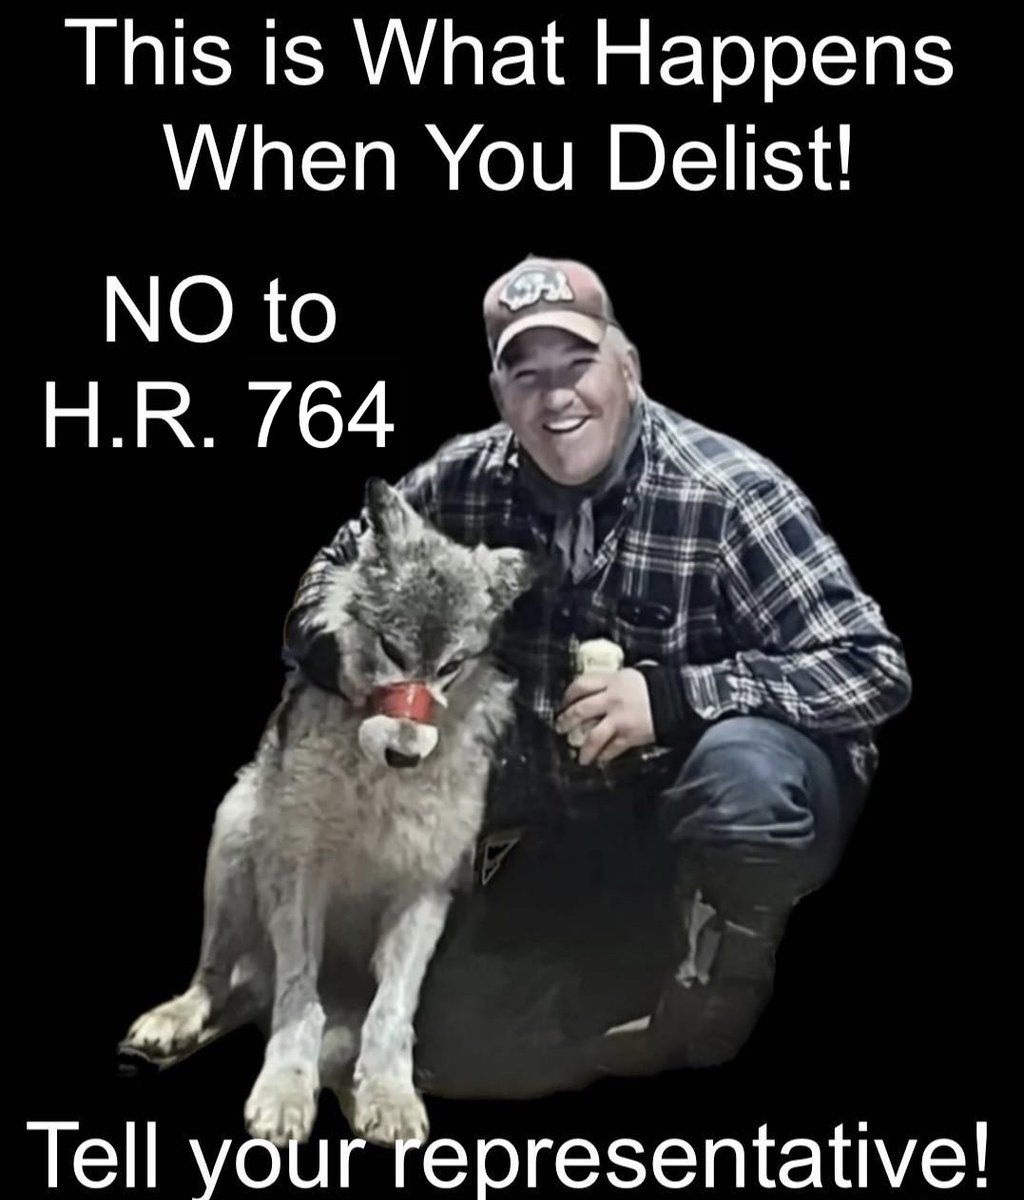 URGENT: Contact your representative, today, to VOTE NO on H.R. 764 which removes protections for all gray wolves in the U.S. and the ability for judicial remove. Enter zip code for your representative contact or call (202) 224-3121 for their phone number. ziplook.house.gov/htbin/findrep_…